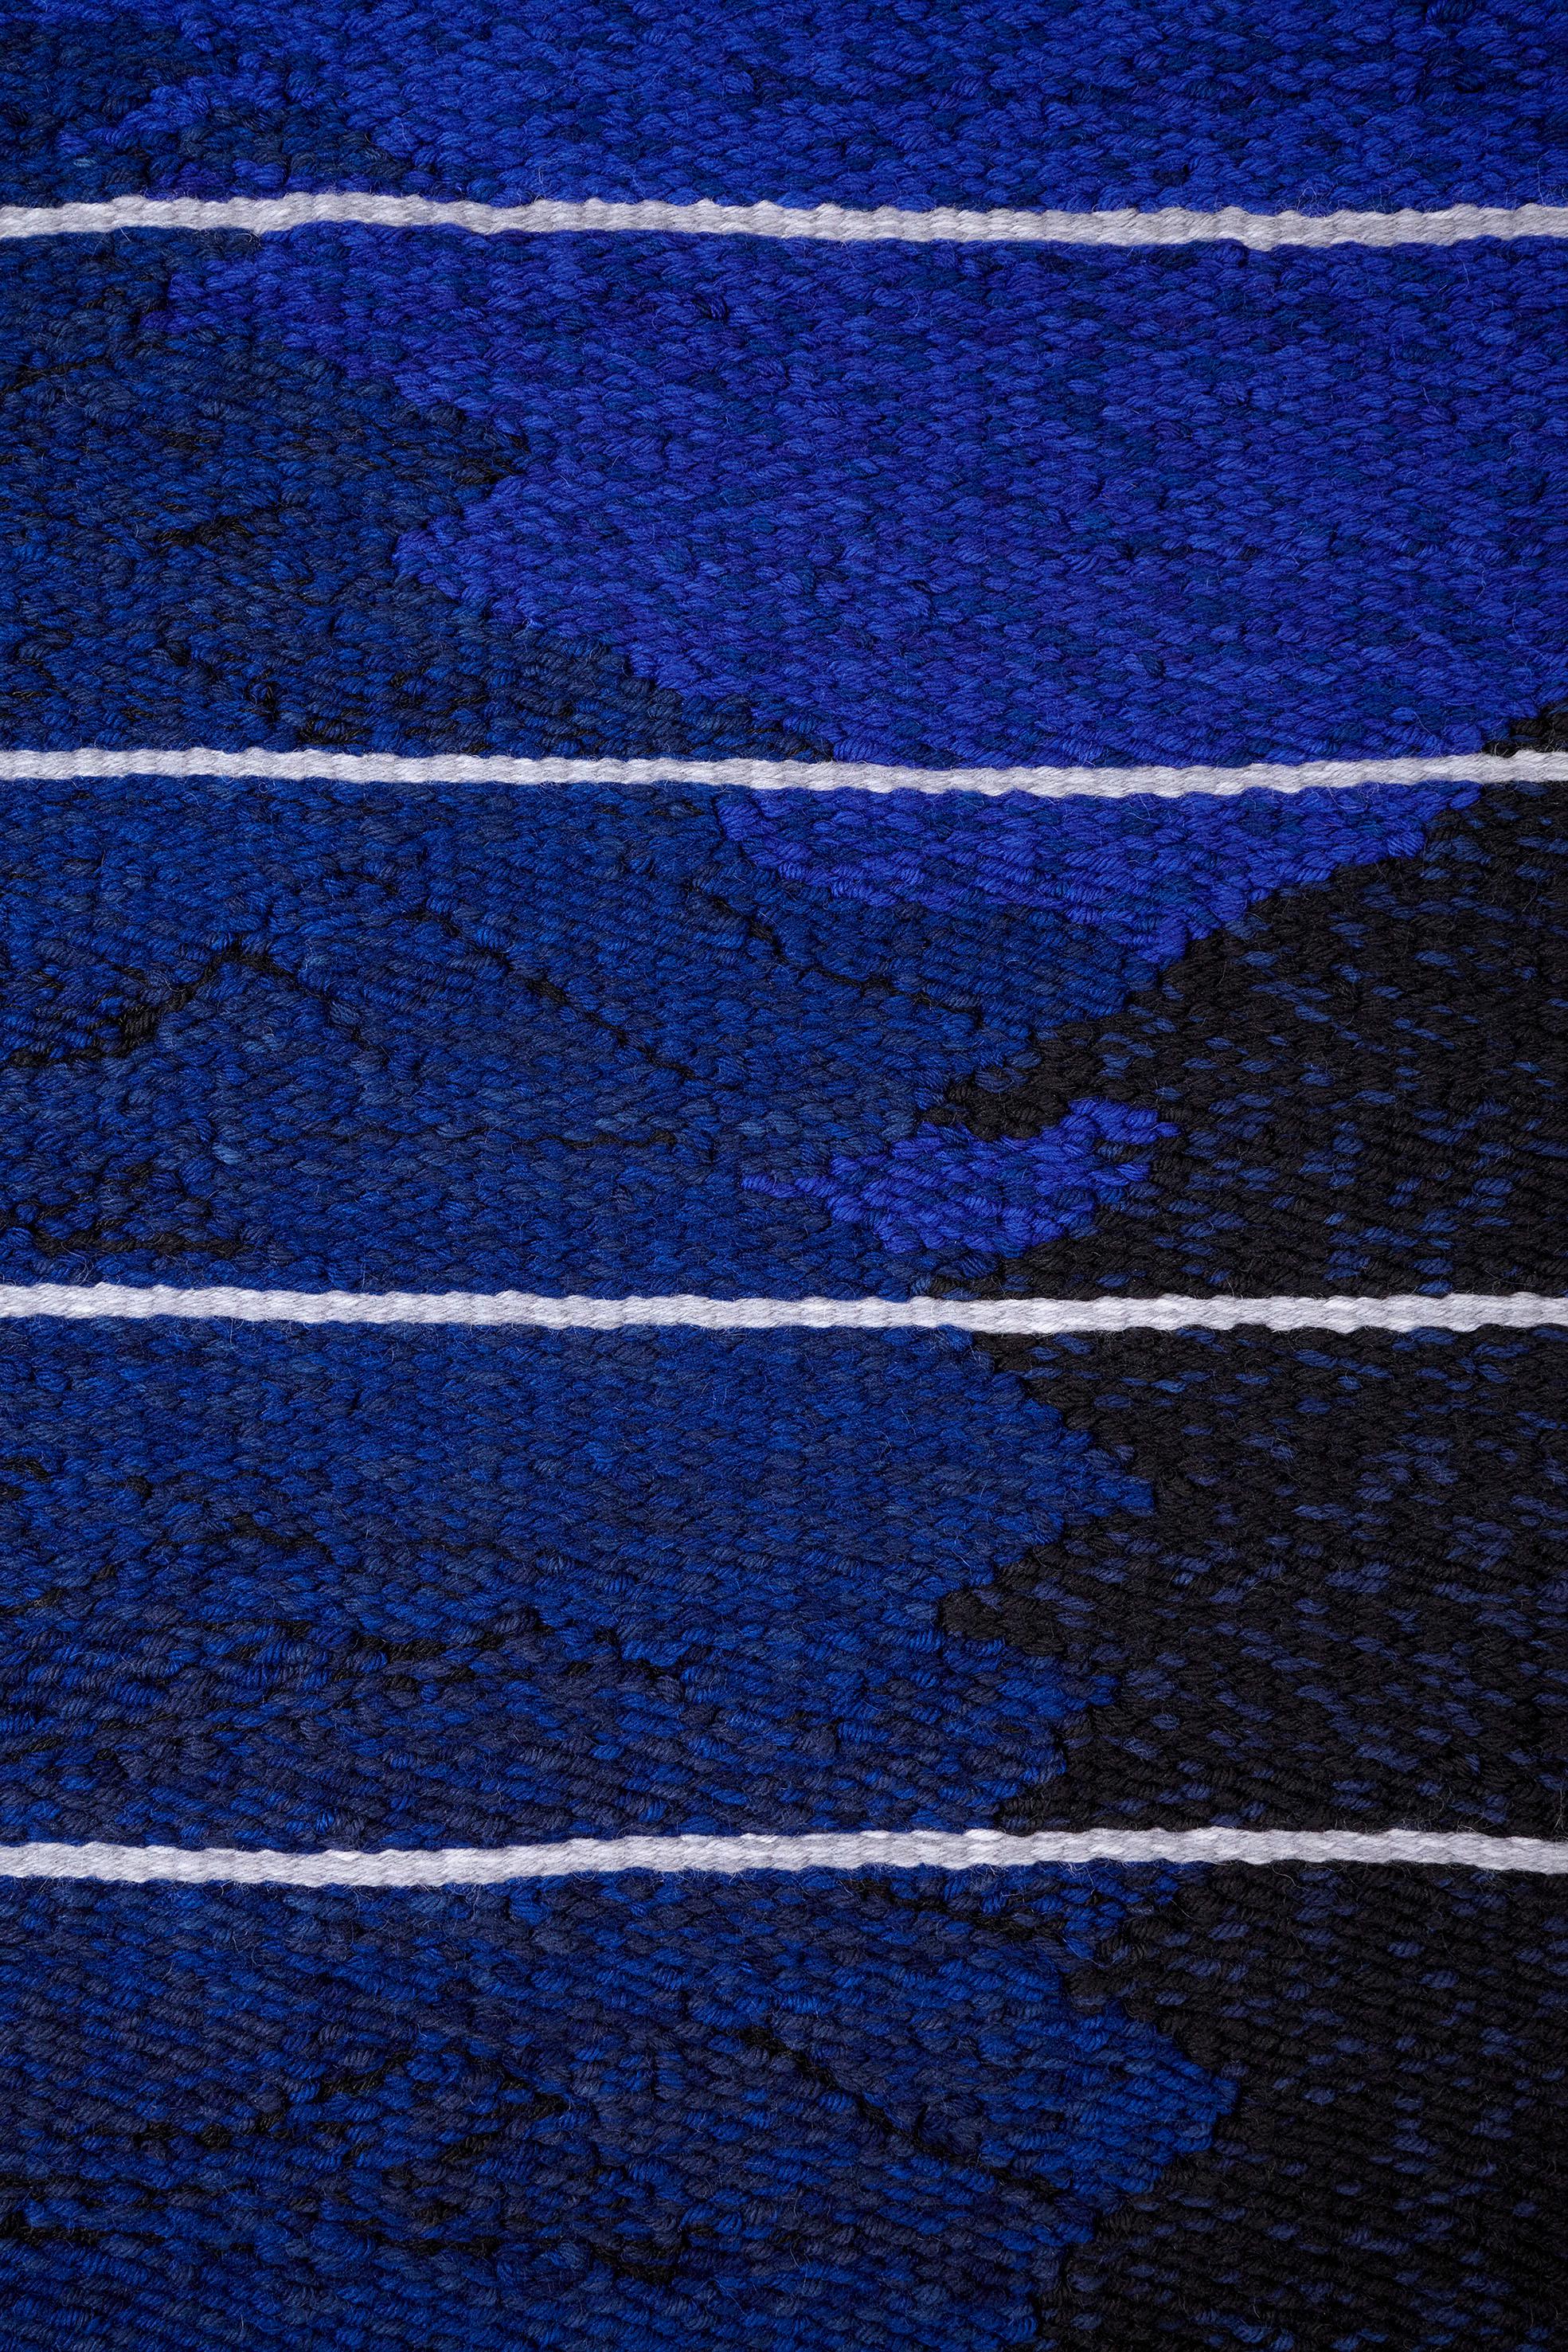 Modern Contemporary Woven Tapestry: Midnight, Moonlight and Shadows For Sale